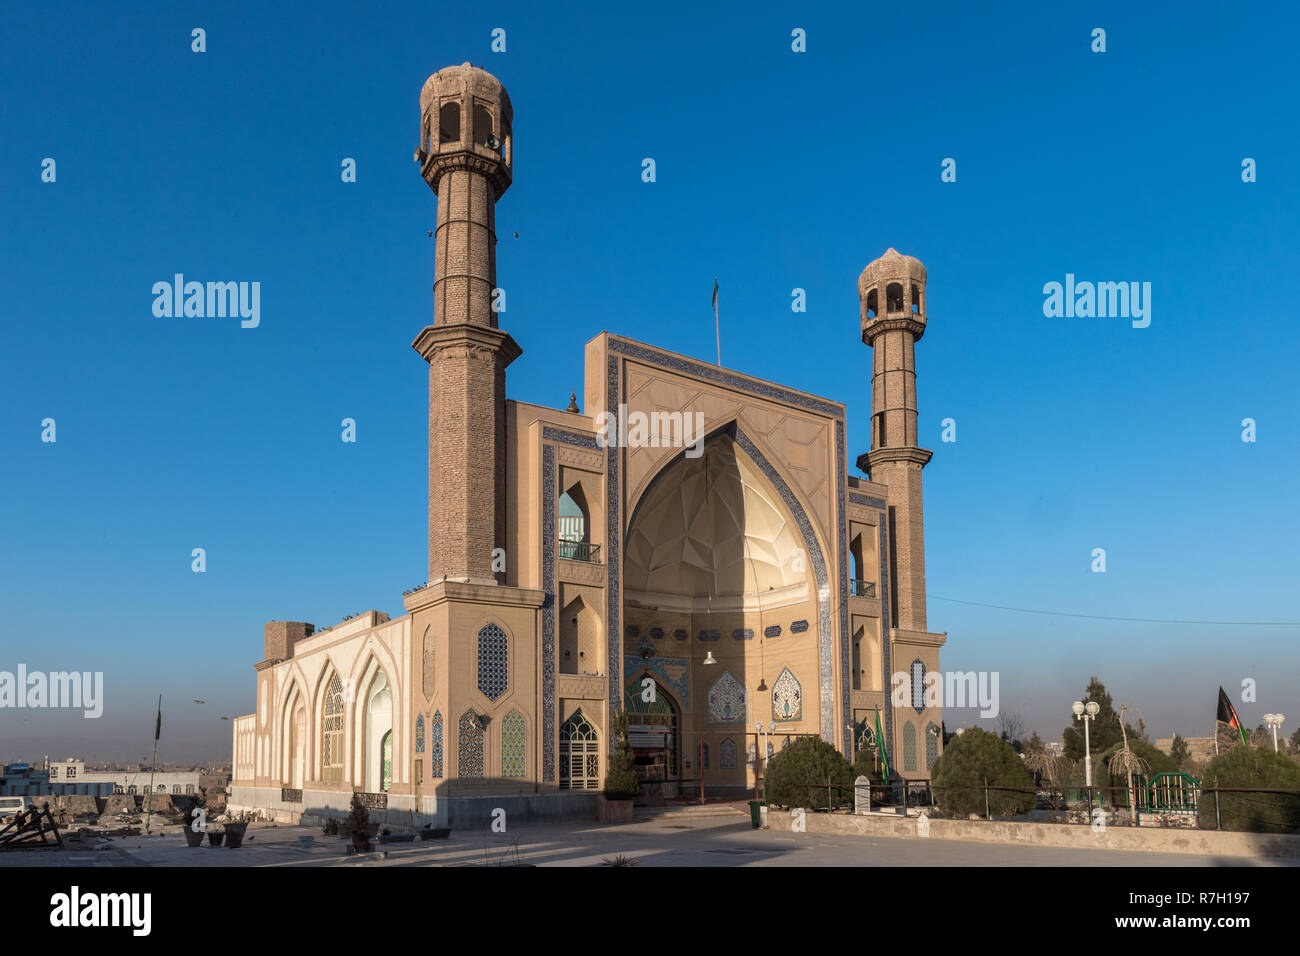 Shrine, Tomb Of Sultan Agha, Herat, Herat Province, Afghanistan Stock Photo